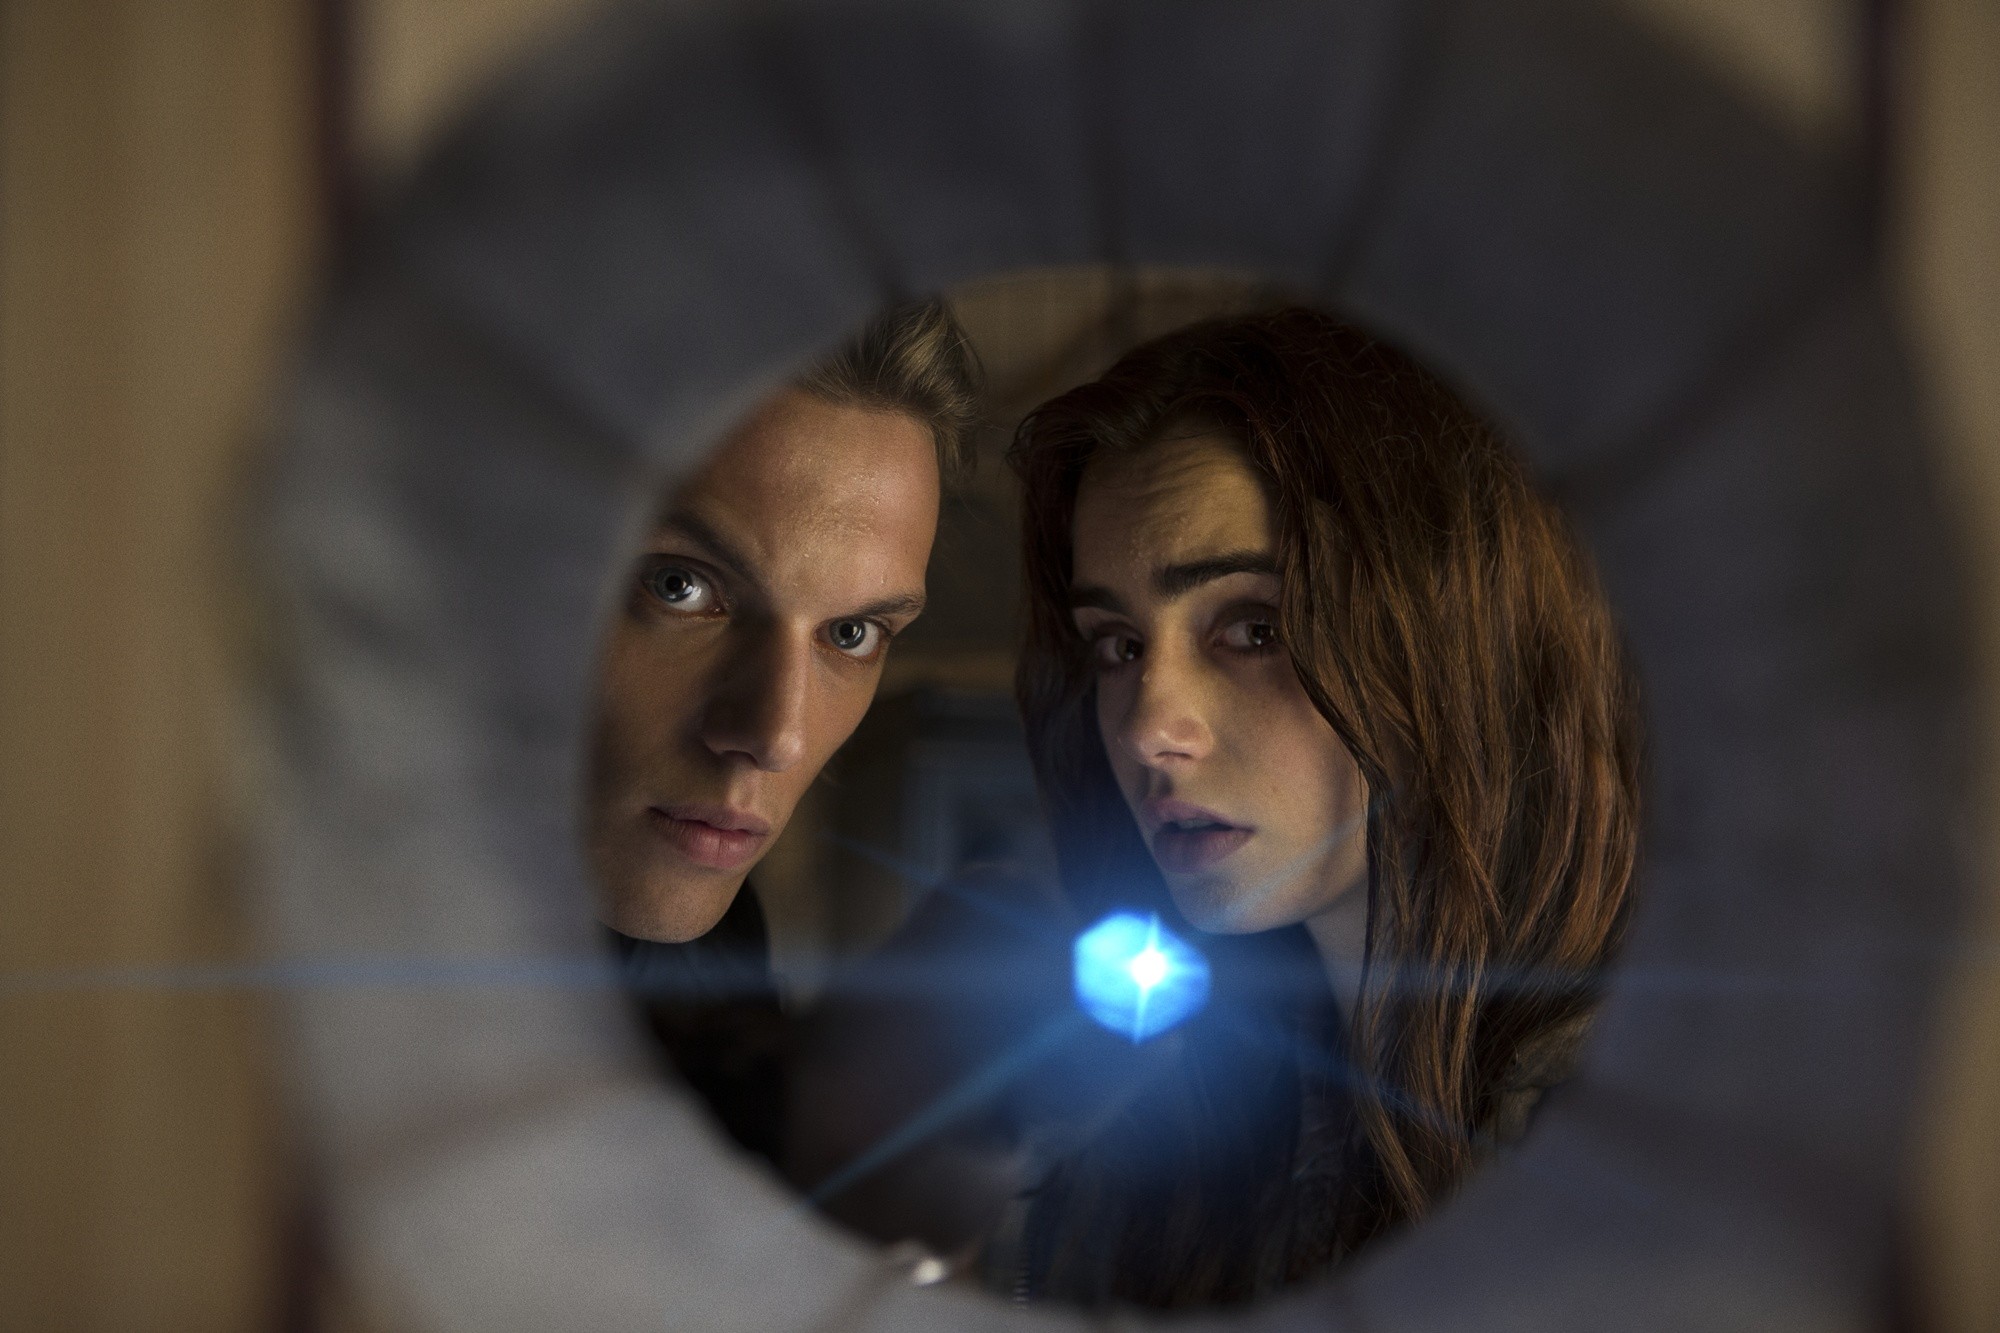 Jamie Campbell Bower stars as Jace Wayland and Lily Collins stars as Clary Fray in Screen Gems' The Mortal Instruments: City of Bones (2013). Photo credit by Rafy.